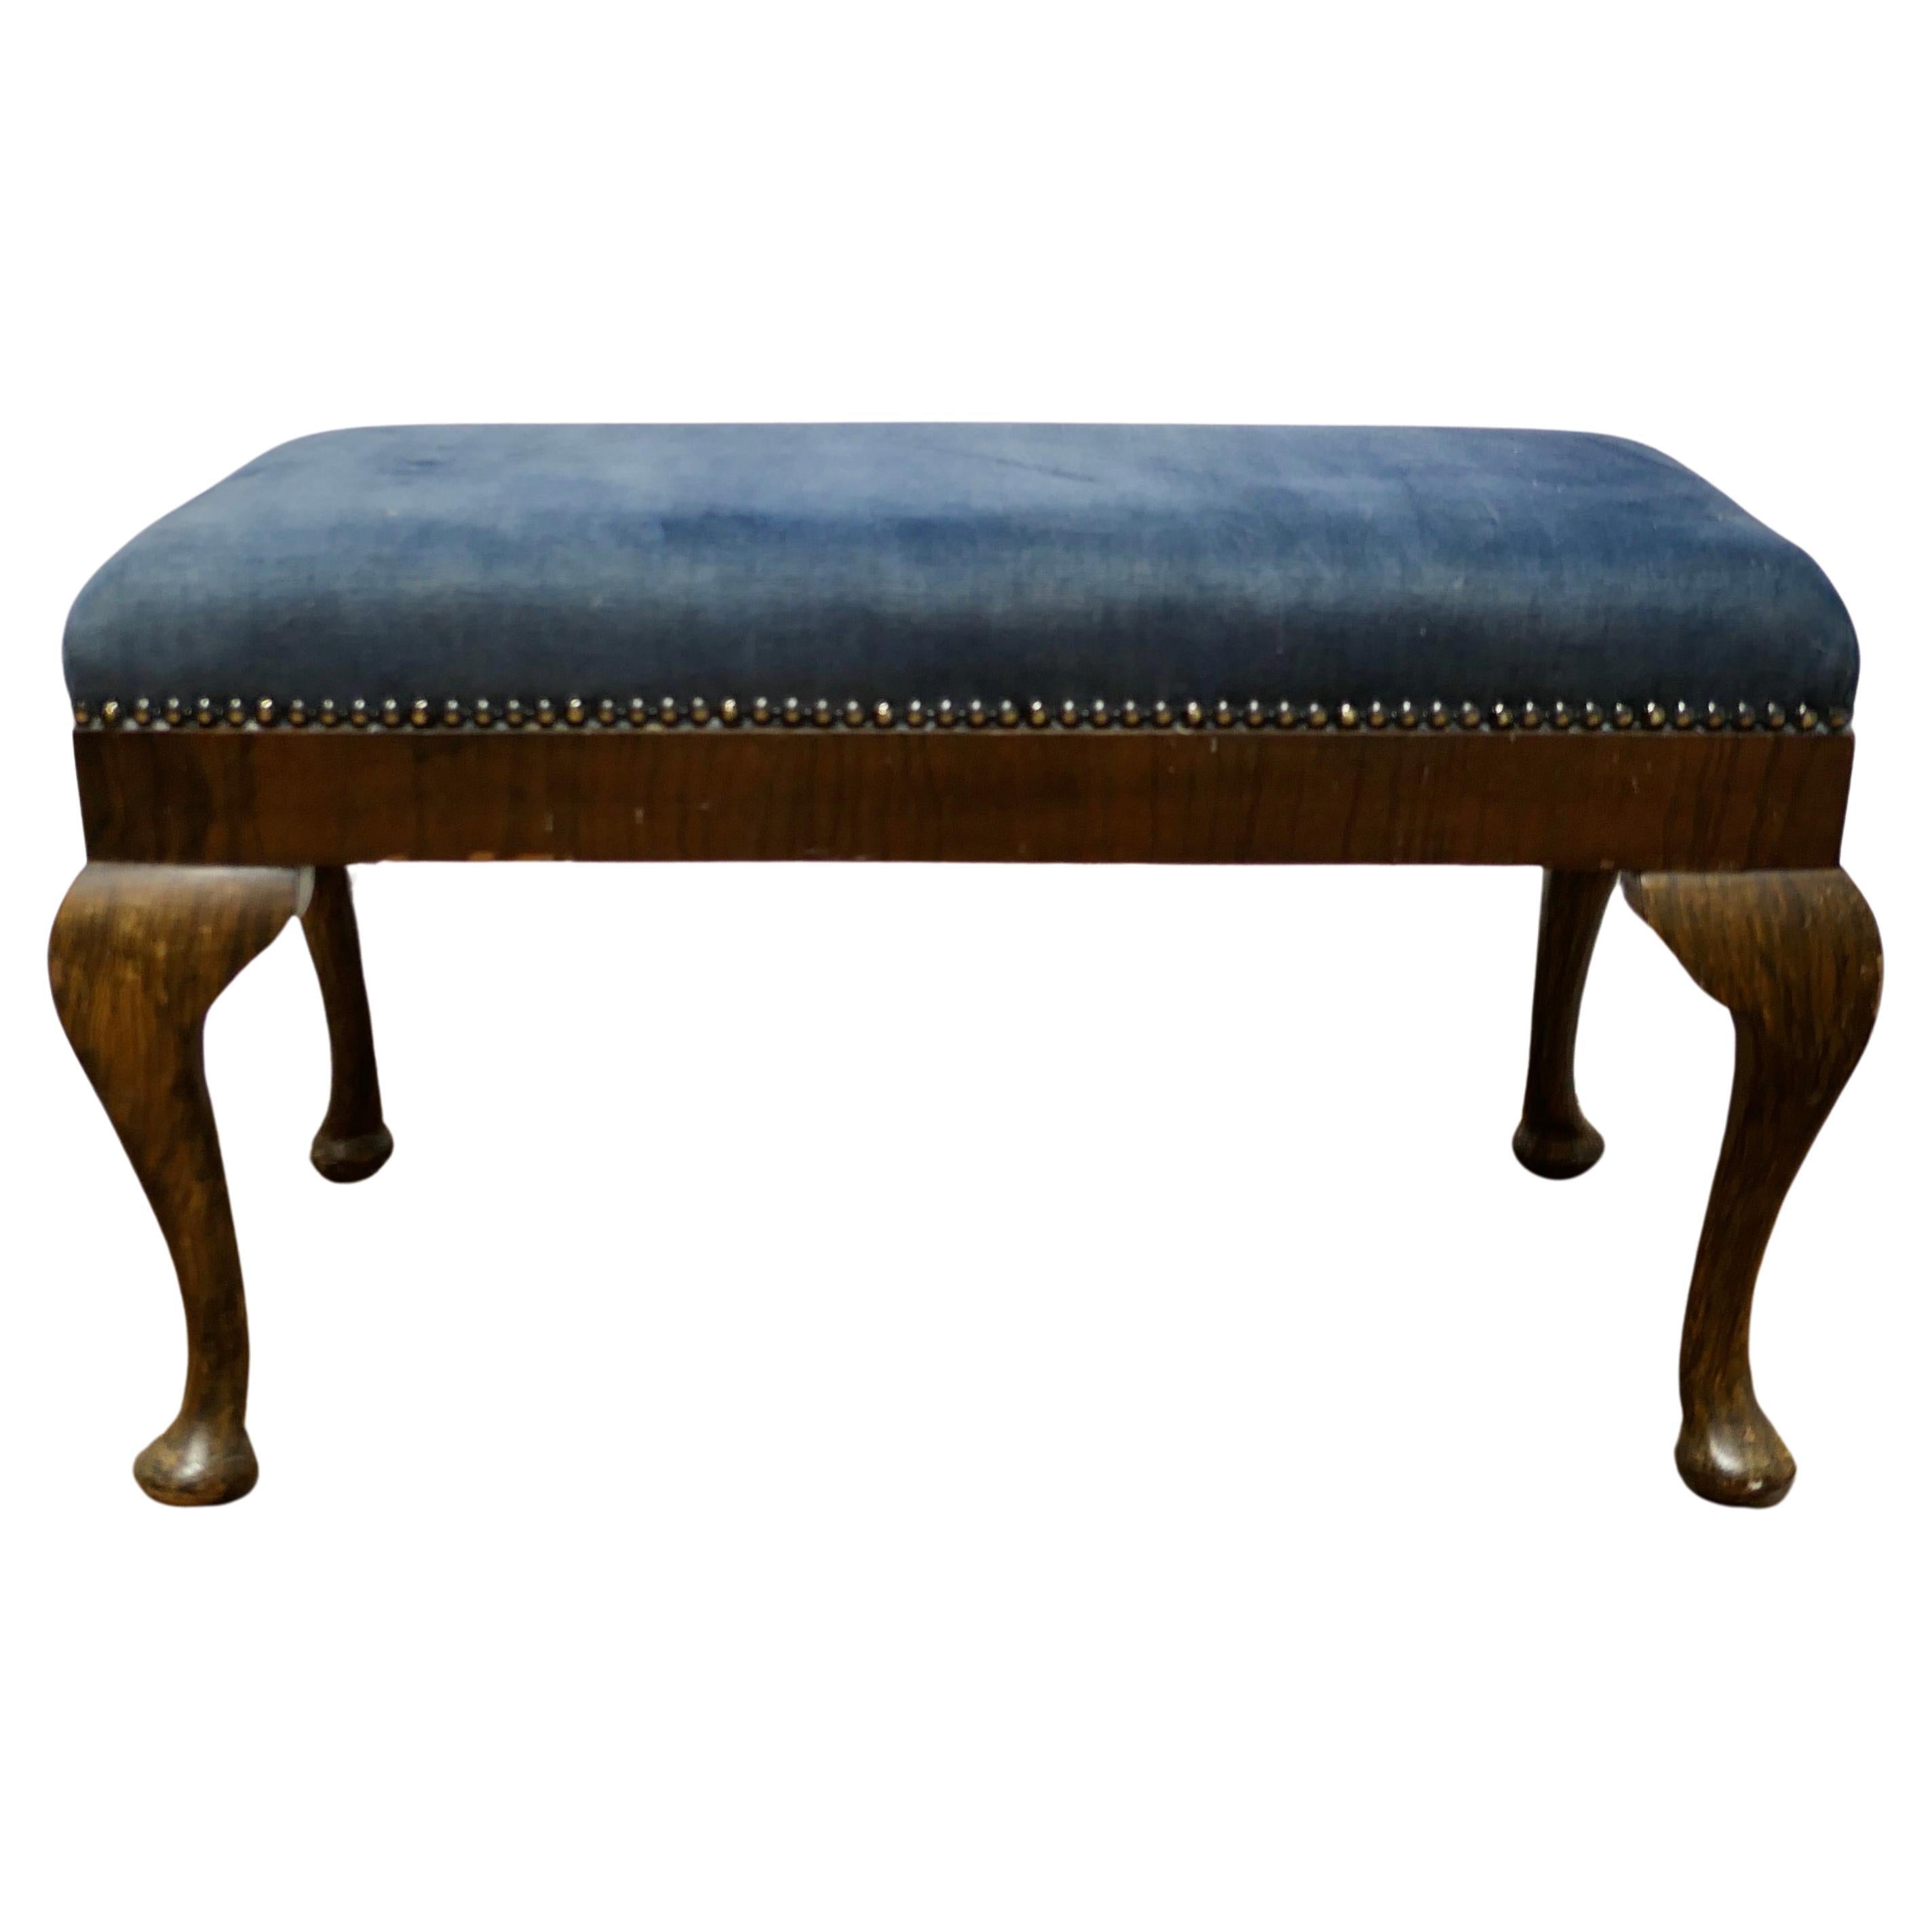 Cabriole Leg Velvet Window Stool    This is a good Sturdy Stool   For Sale